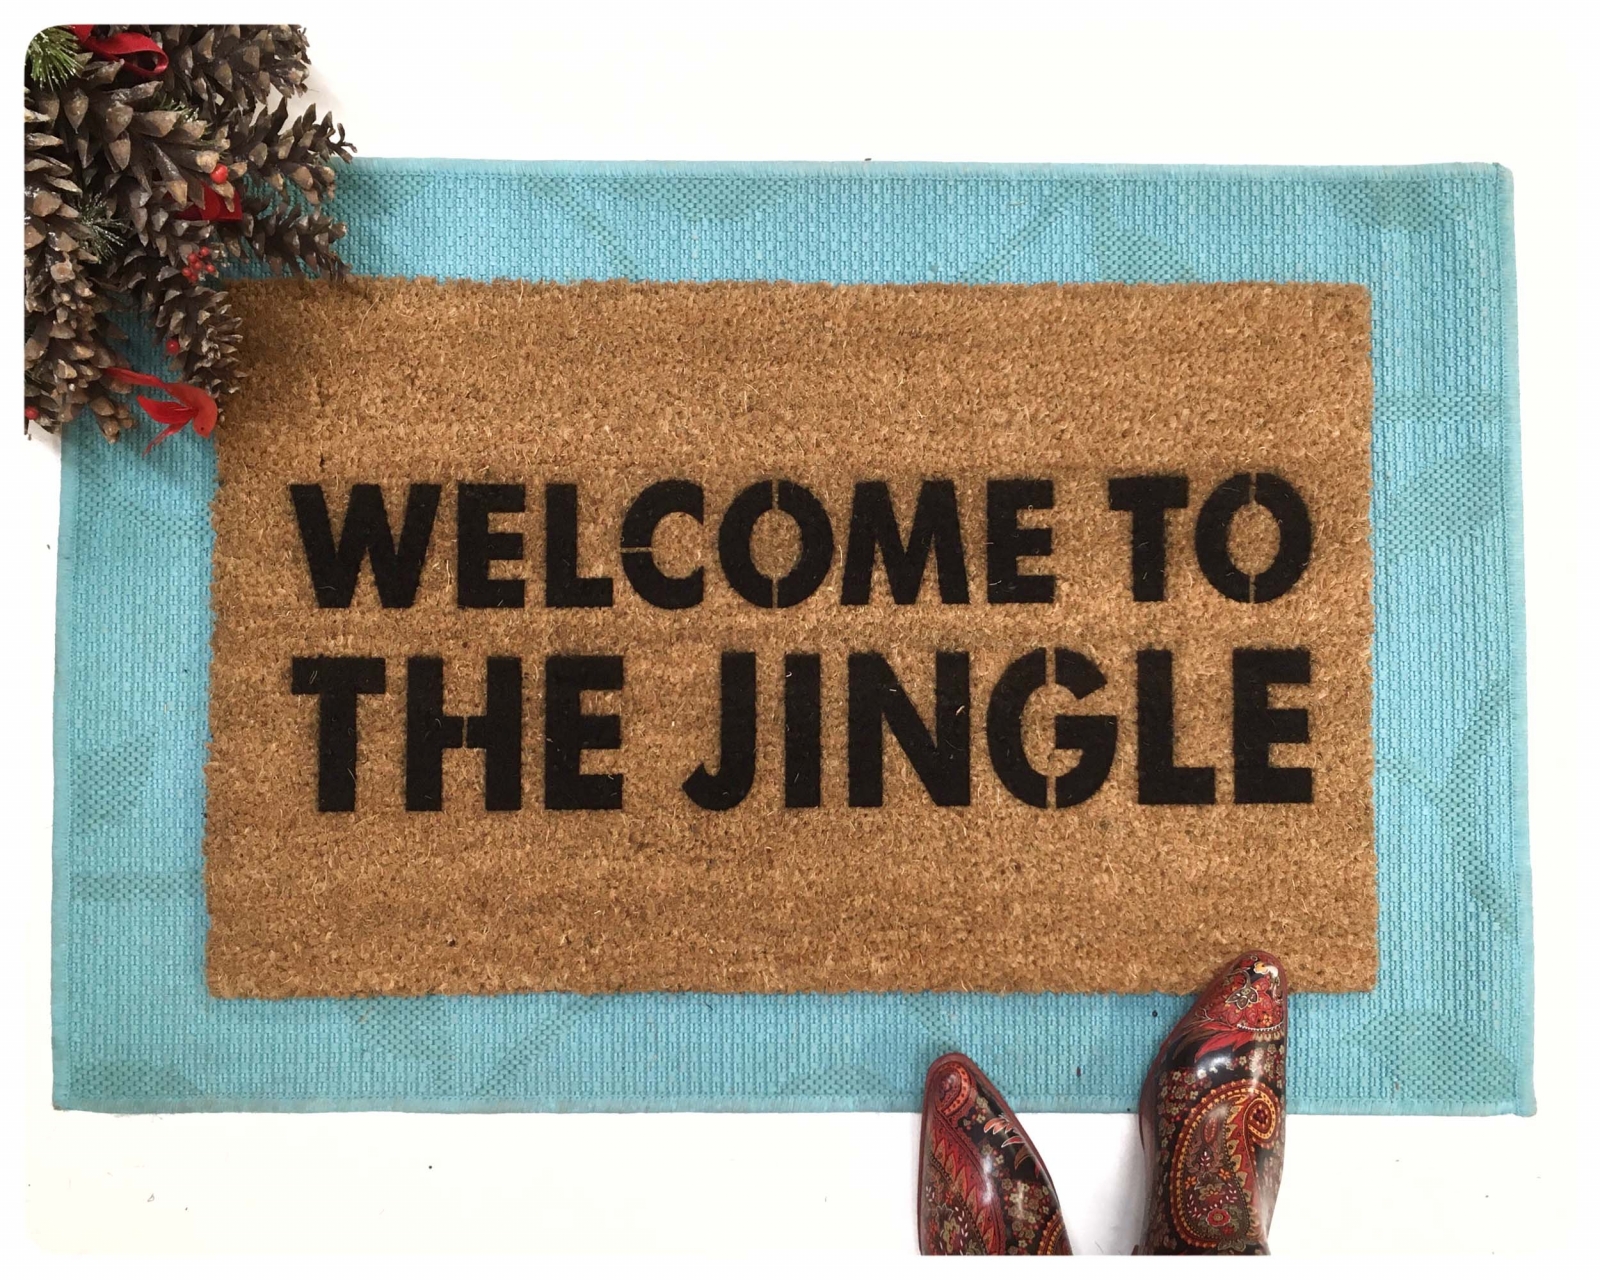  Eye Test Jungle Entry, Welcome to The Jungle Doormat, Welcome  to The Jungle Lyrics, Rock Song Lyrics, Eye Test, Jungle Doormat, Jungle  Way : Patio, Lawn & Garden